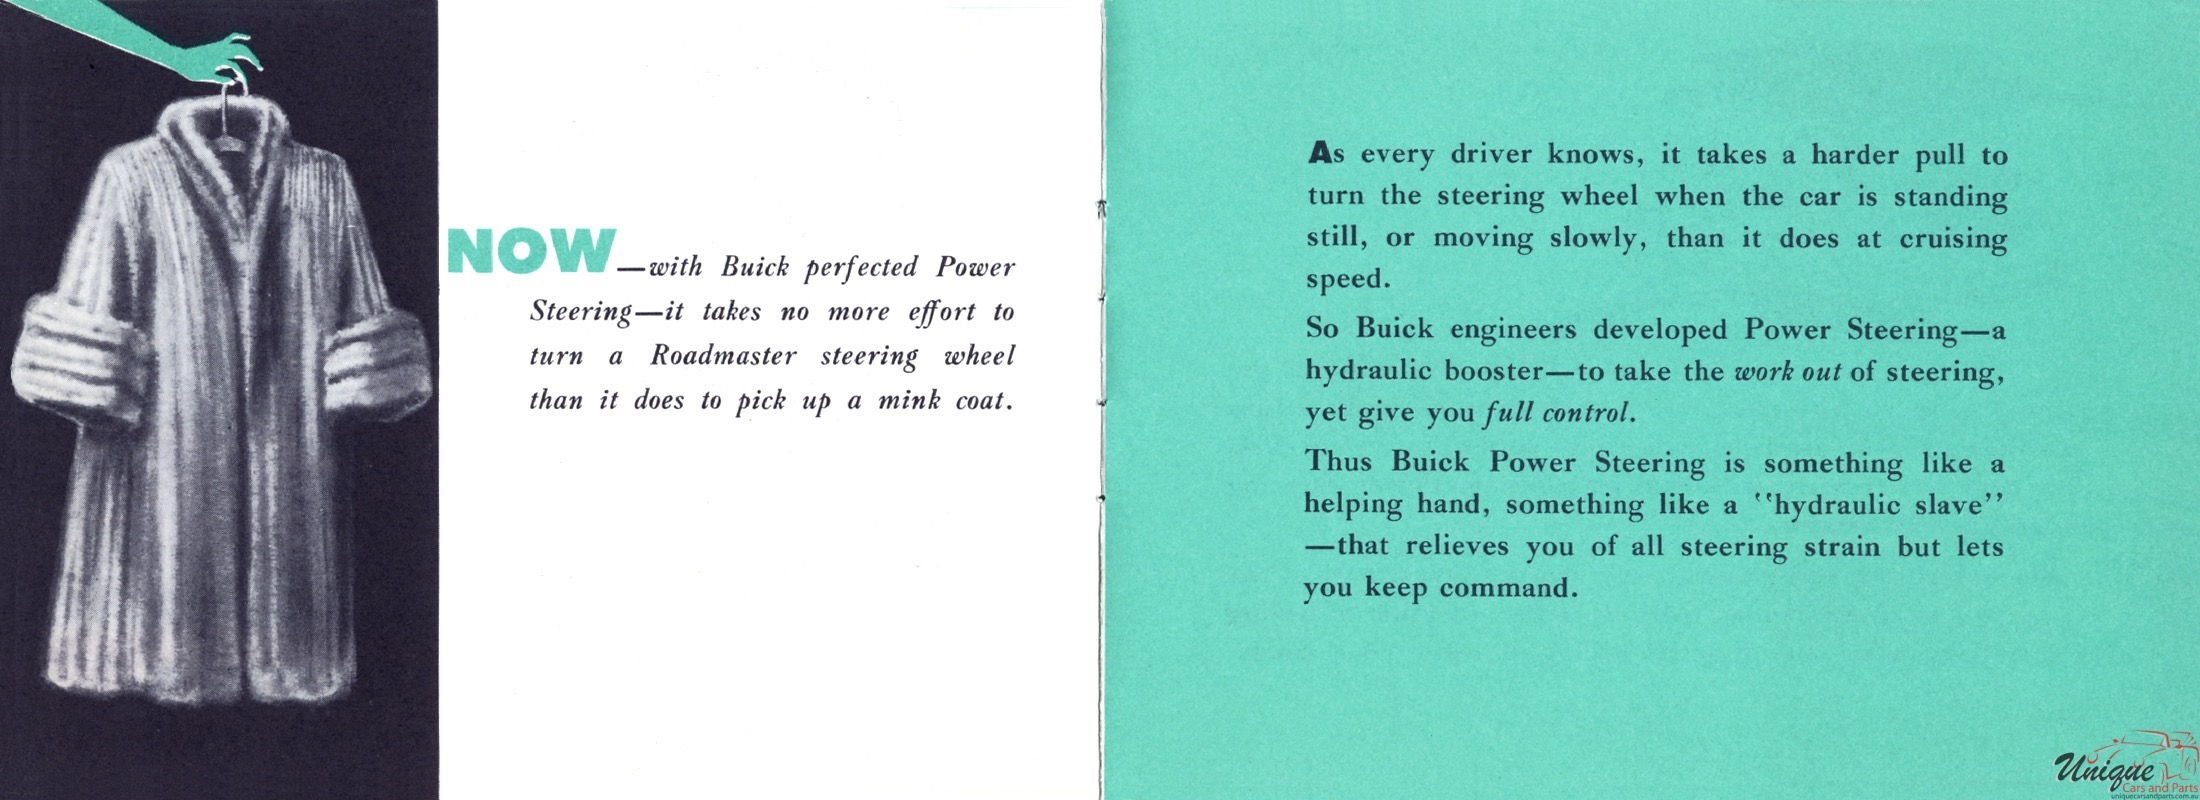 1952 Buick Power Steering Folder Page 2